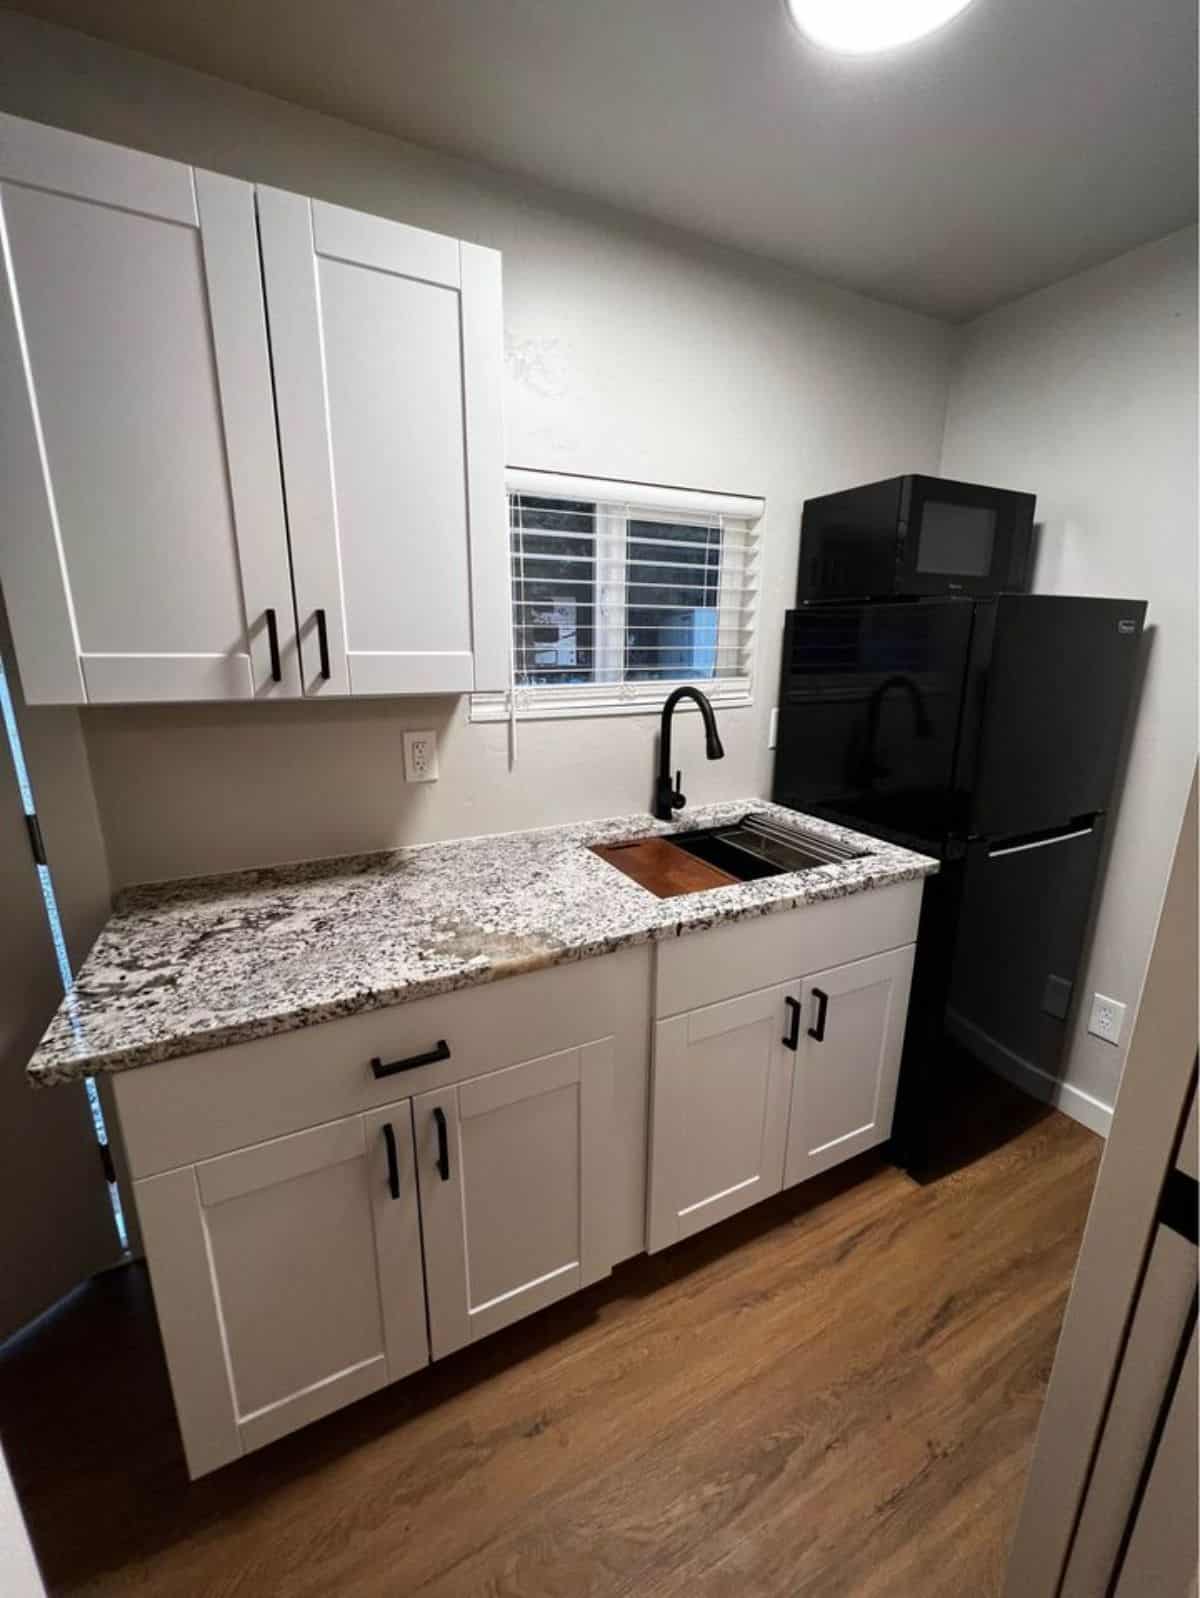 Gorgeous and well organized kitchen area of Brand-New Tiny Home